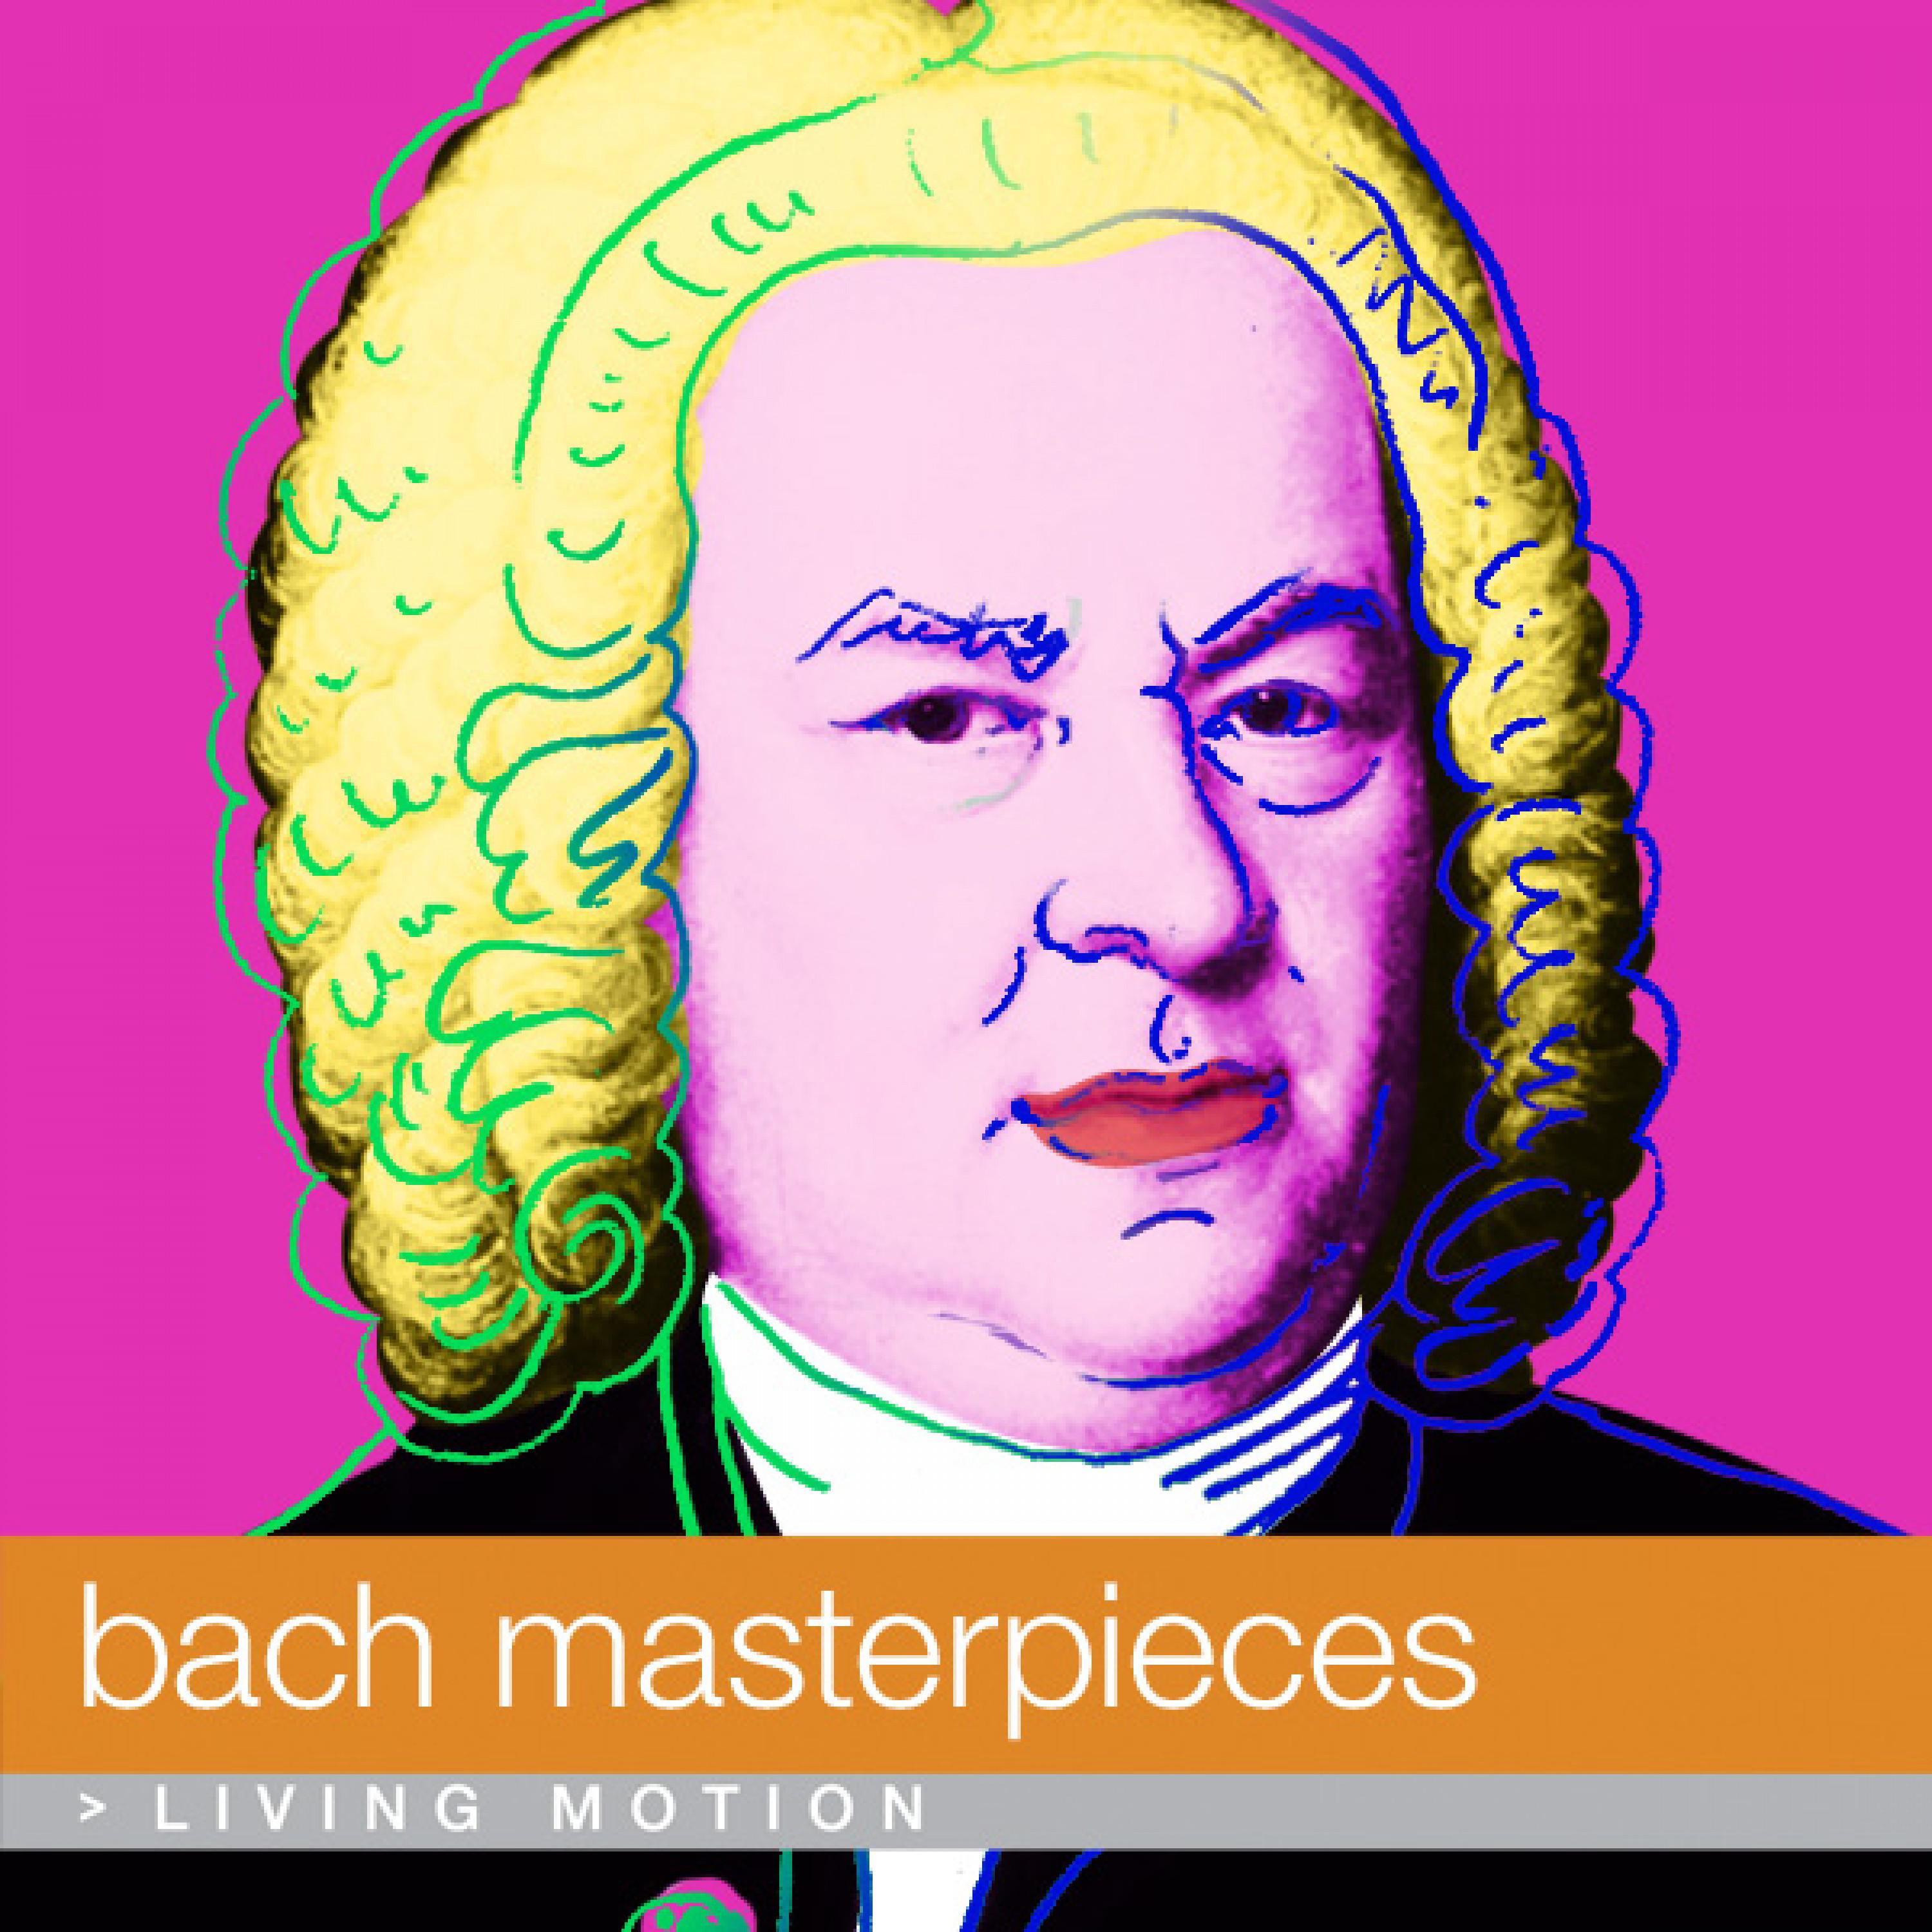 Bach: Masterpieces Baroque, Classical music, Brandenburg Concerto, Well Tempered Piano, Sonata, Toccata, Fugue, Clavier Ü bung, Inventions, Living Motion